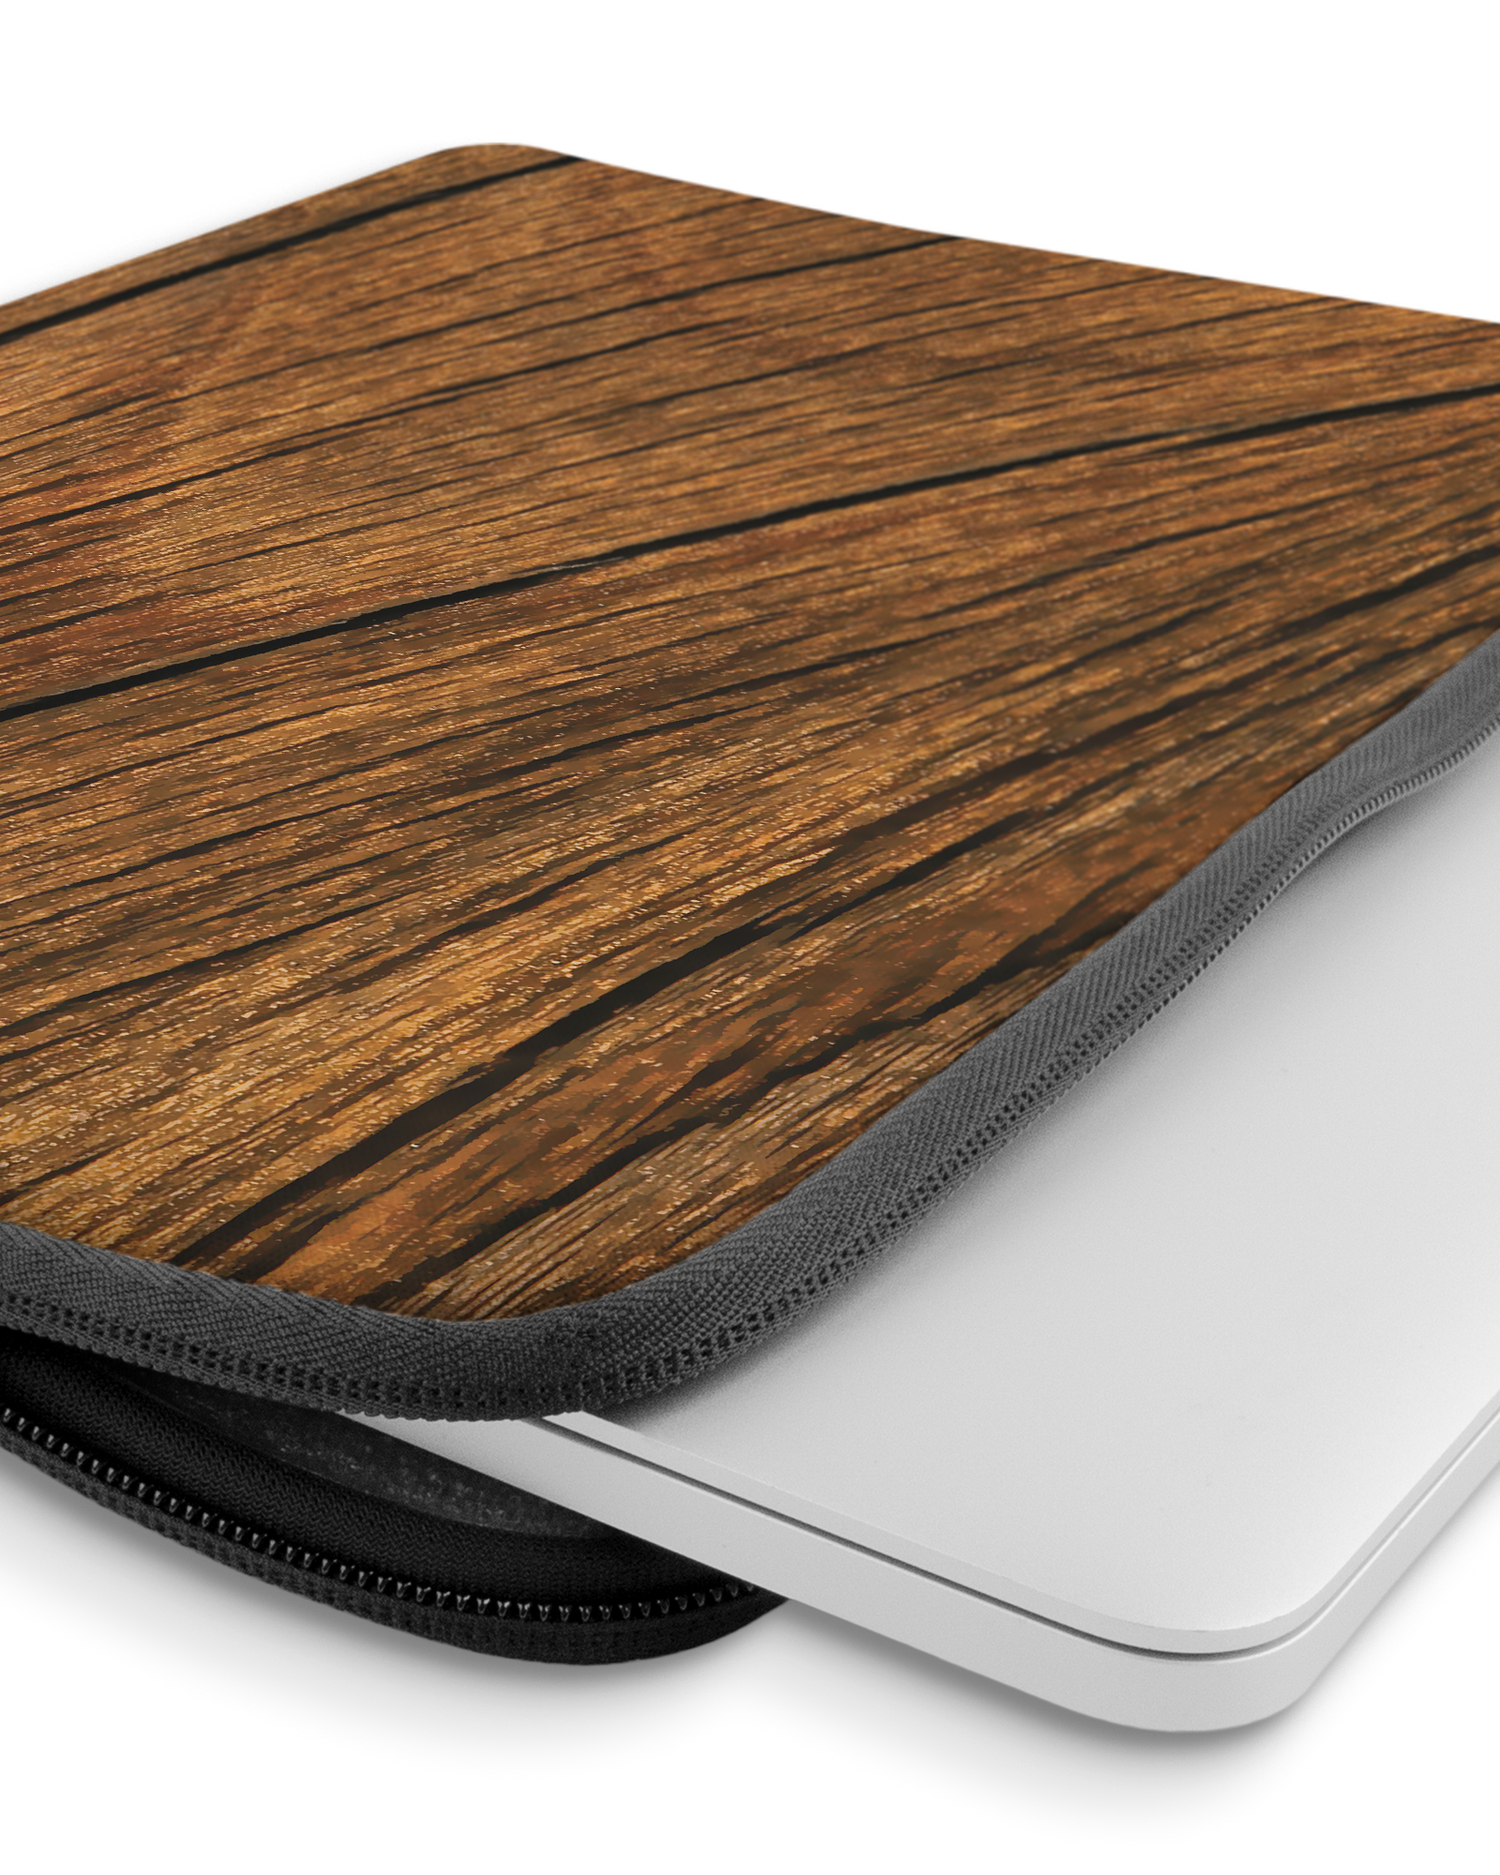 Wood Laptop Case 14 inch with device inside